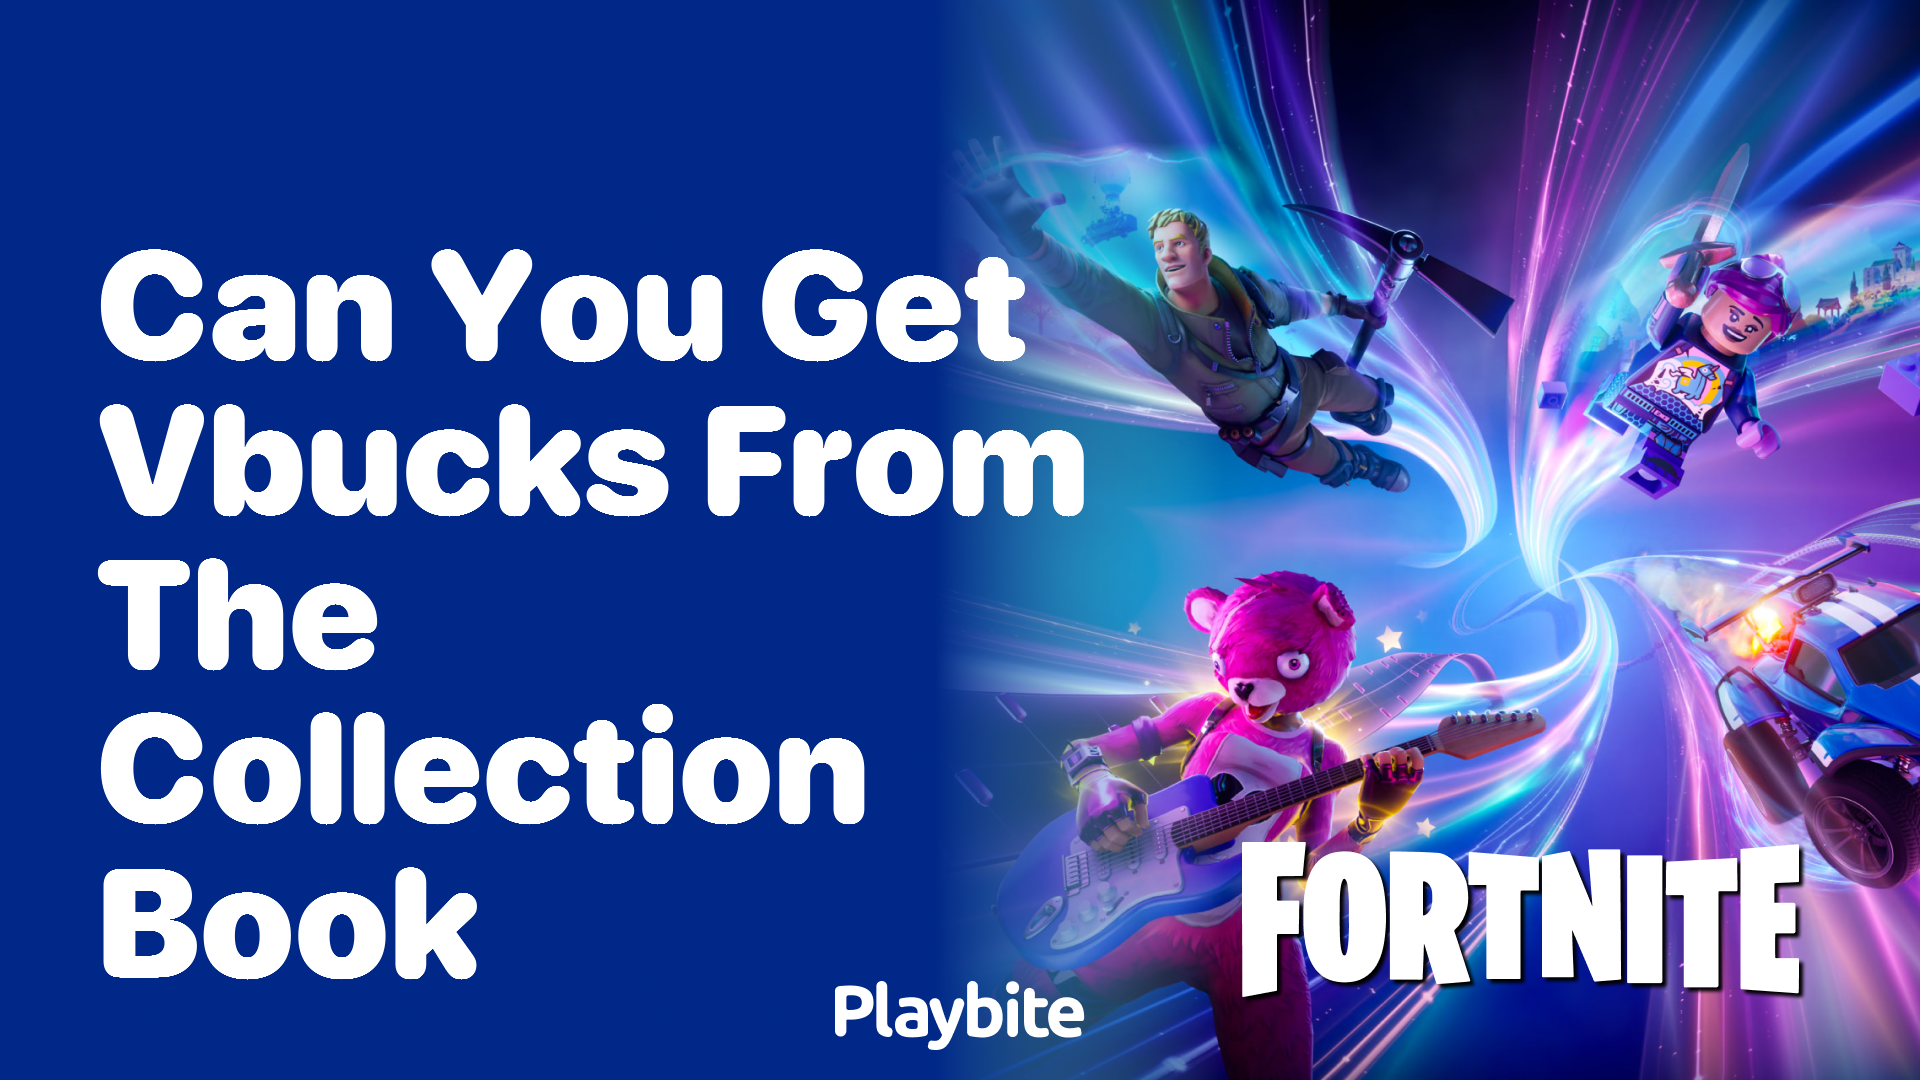 Can You Get V-Bucks from the Collection Book in Fortnite?